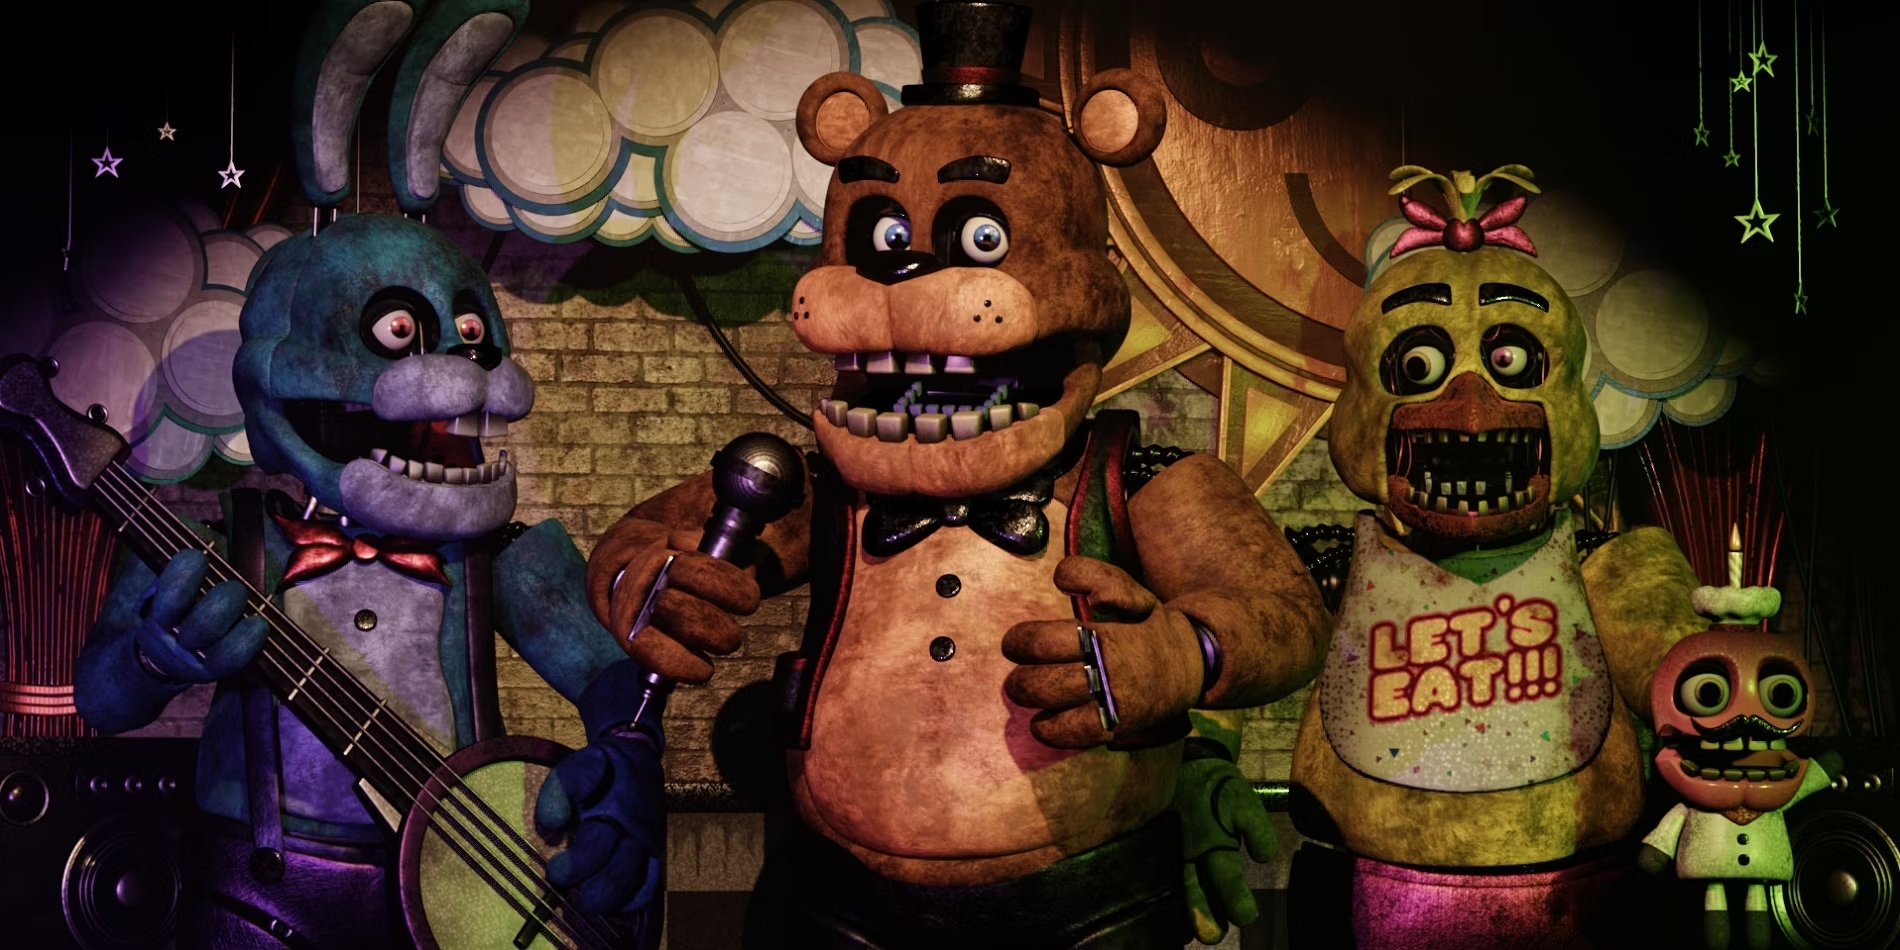 Five Nights at Freddy's Game Leaks; Creator Encourages Community Discussion